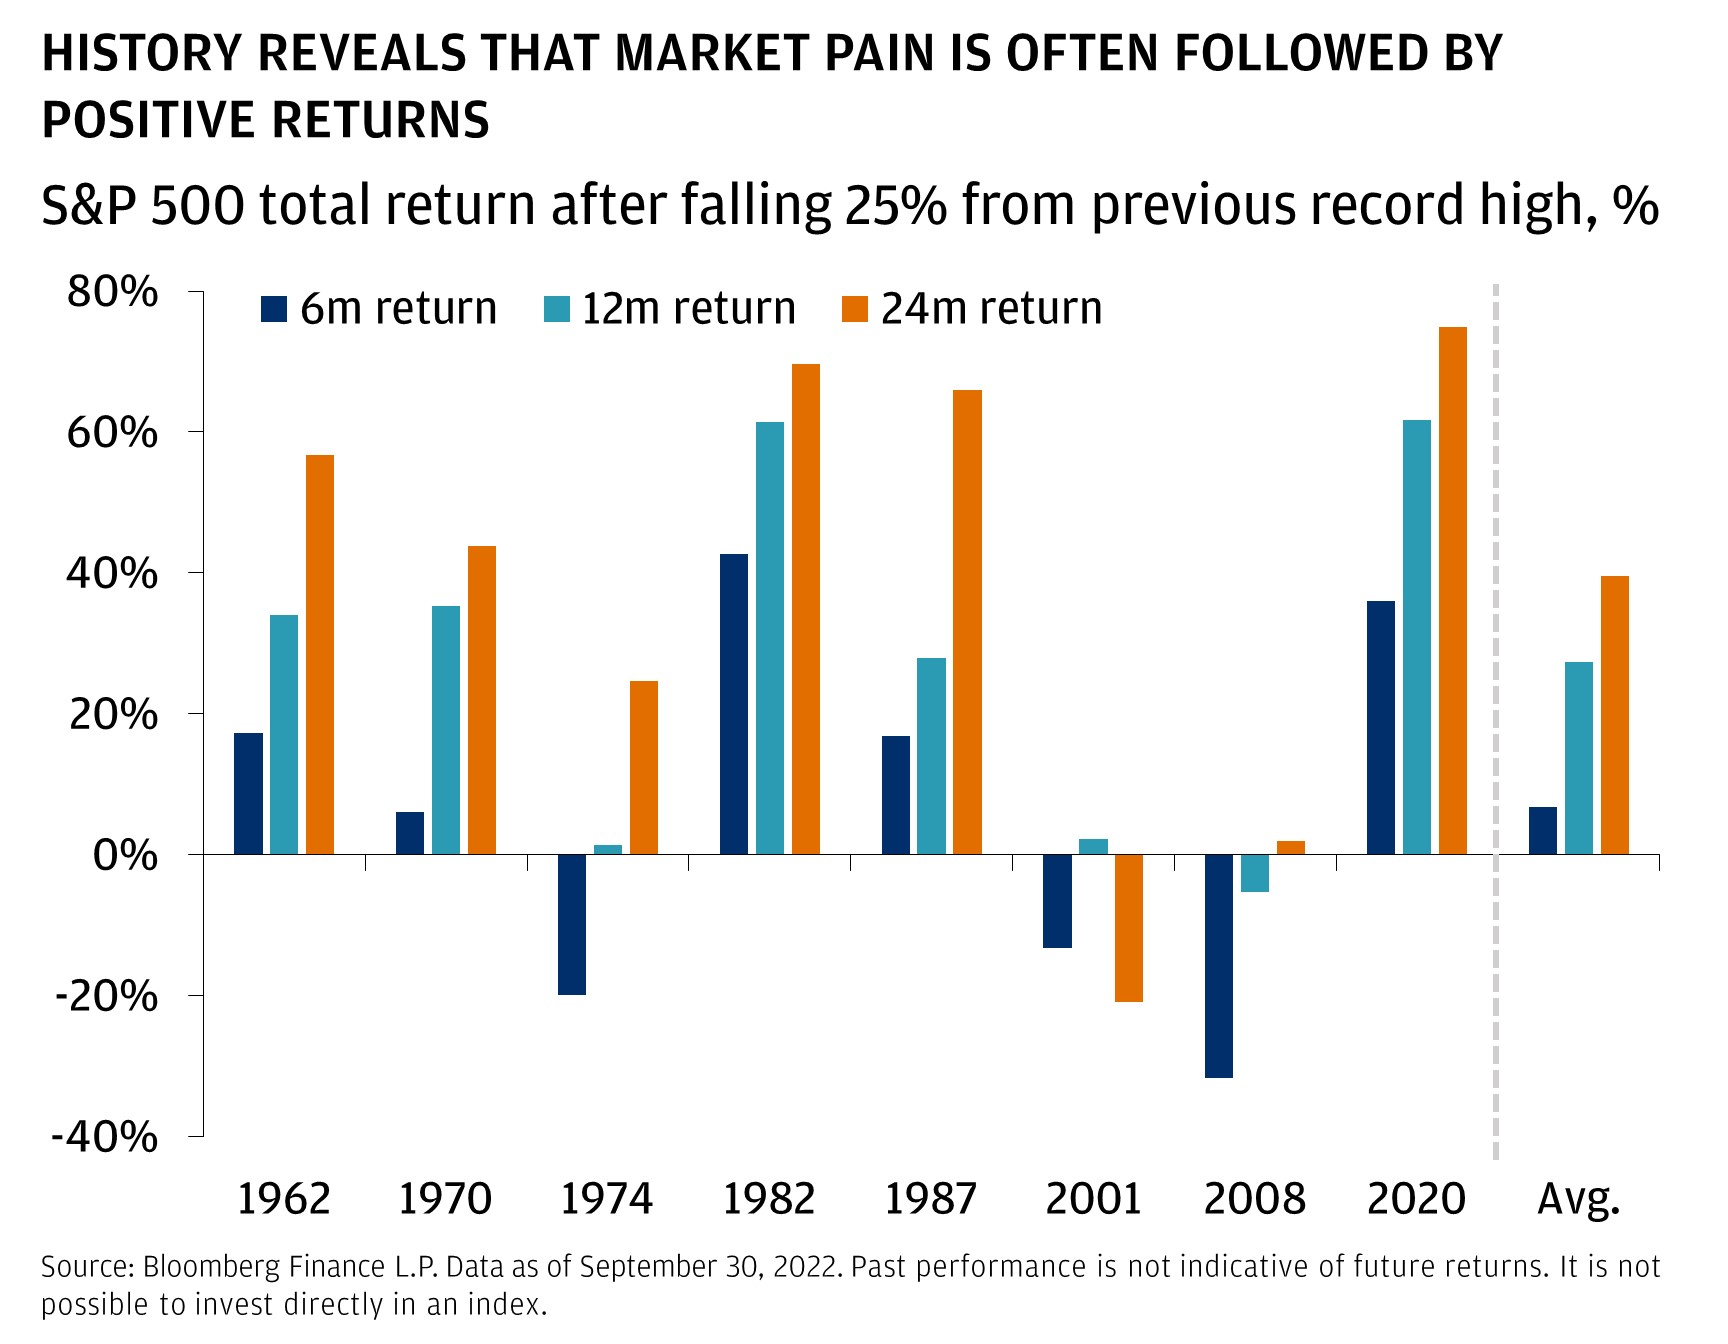 This chart shows the 6-month, 12-month and 24-month returns following eight historical instances of the S&P 500 falling 25% from its prior high.